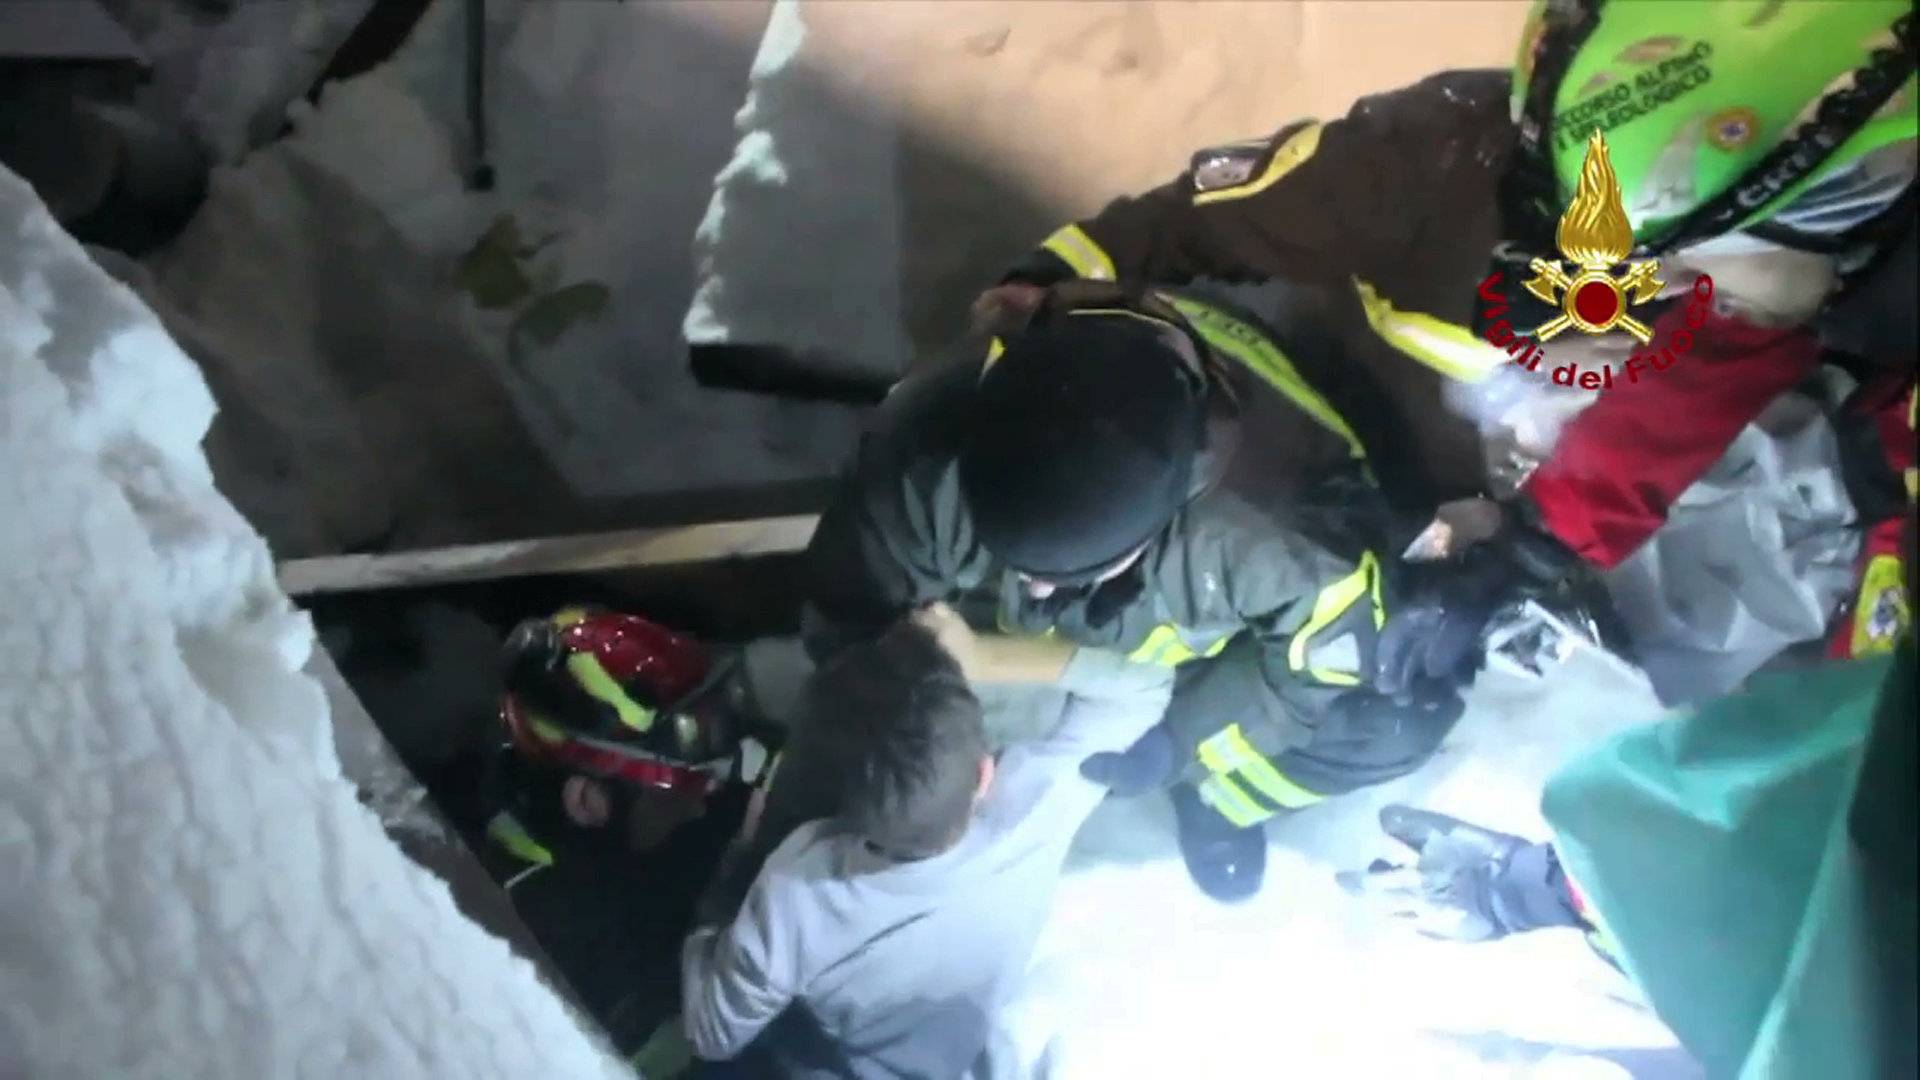 A still image taken from a video shows a survivor, rescued by Italian Firefighters, at the Hotel Rigopiano in Farindola, central Italy, which was hit by an avalanche